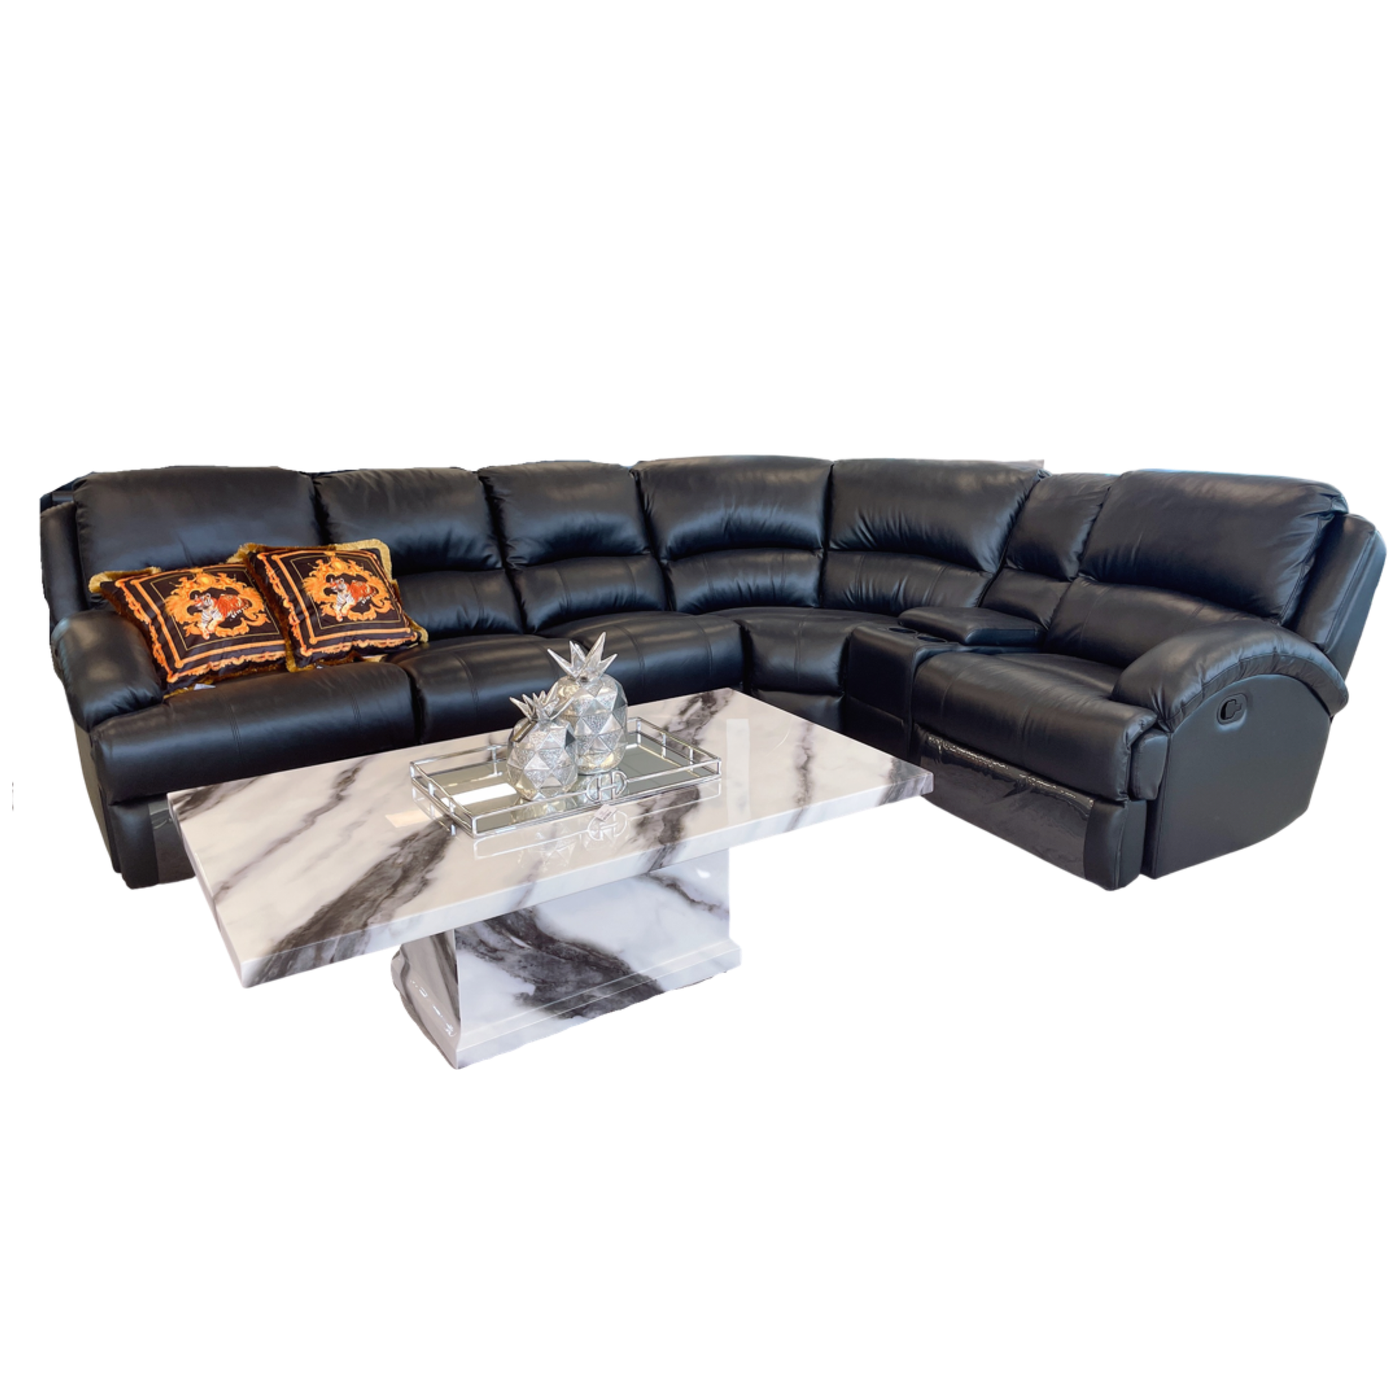 Anderson 6pc Modular Leather Lounge Suite